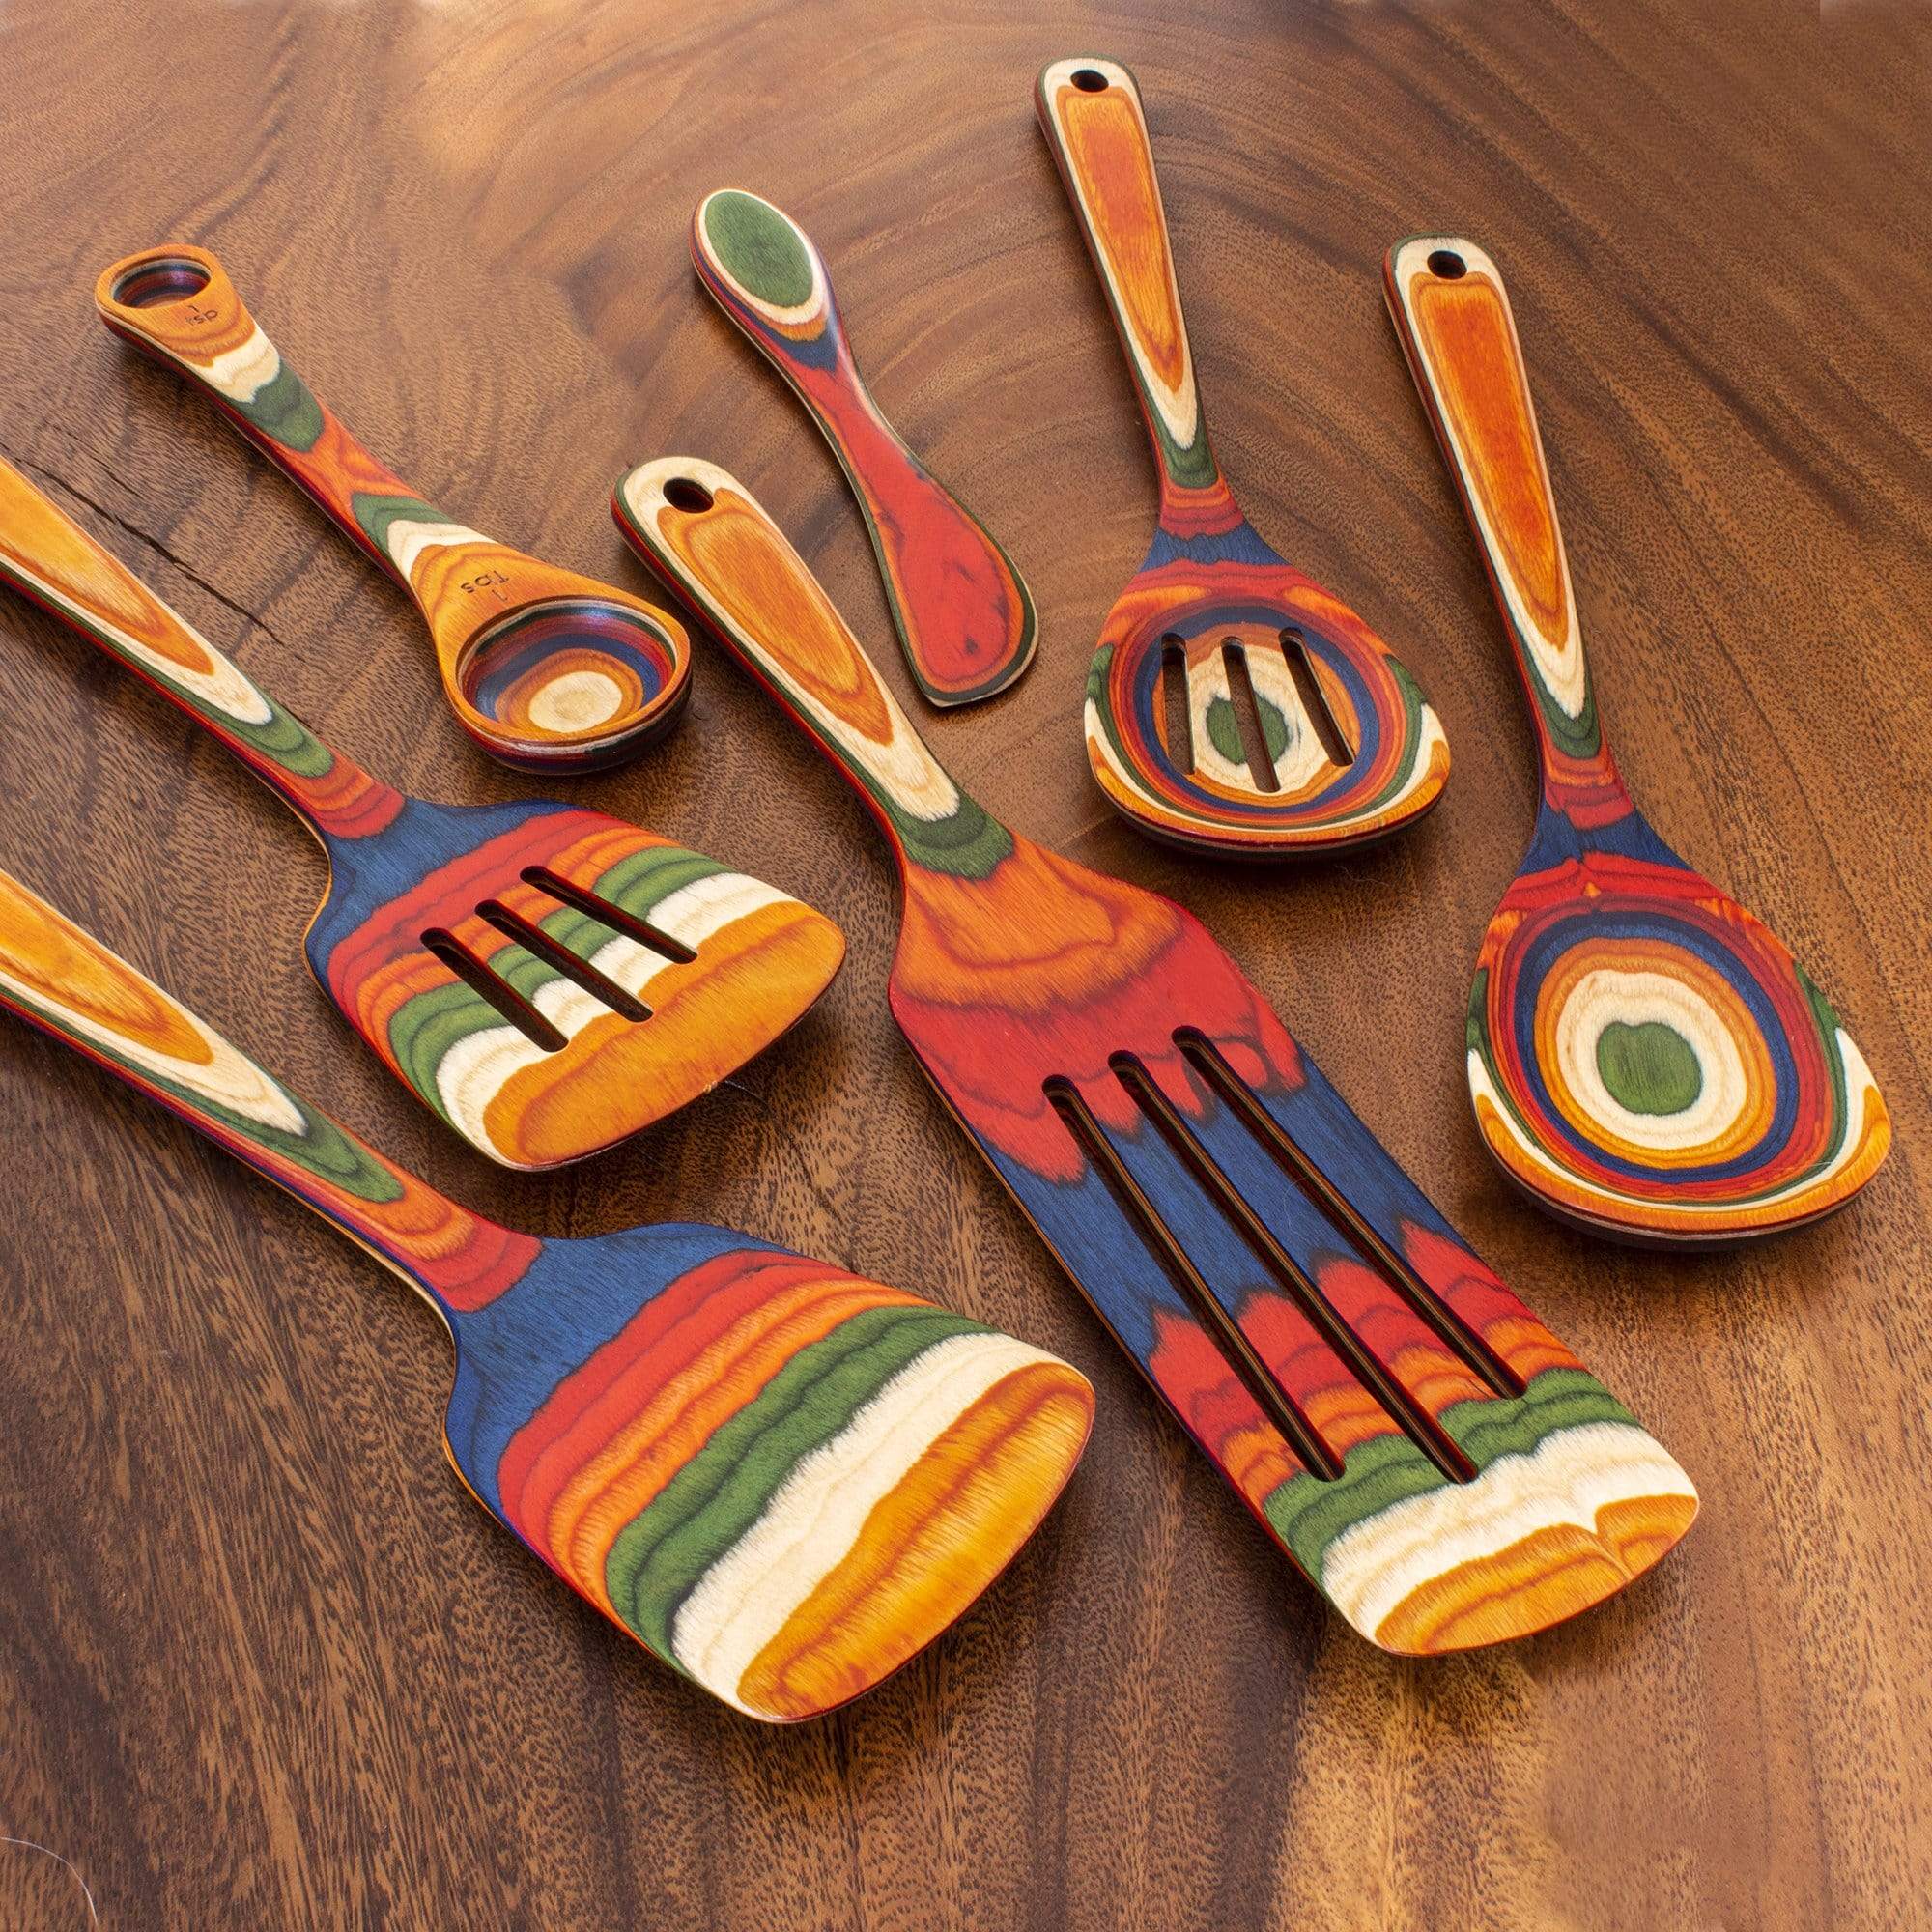 14 Pcs Silicone Cooking Kitchen Utensils Set with Holder, Wooden